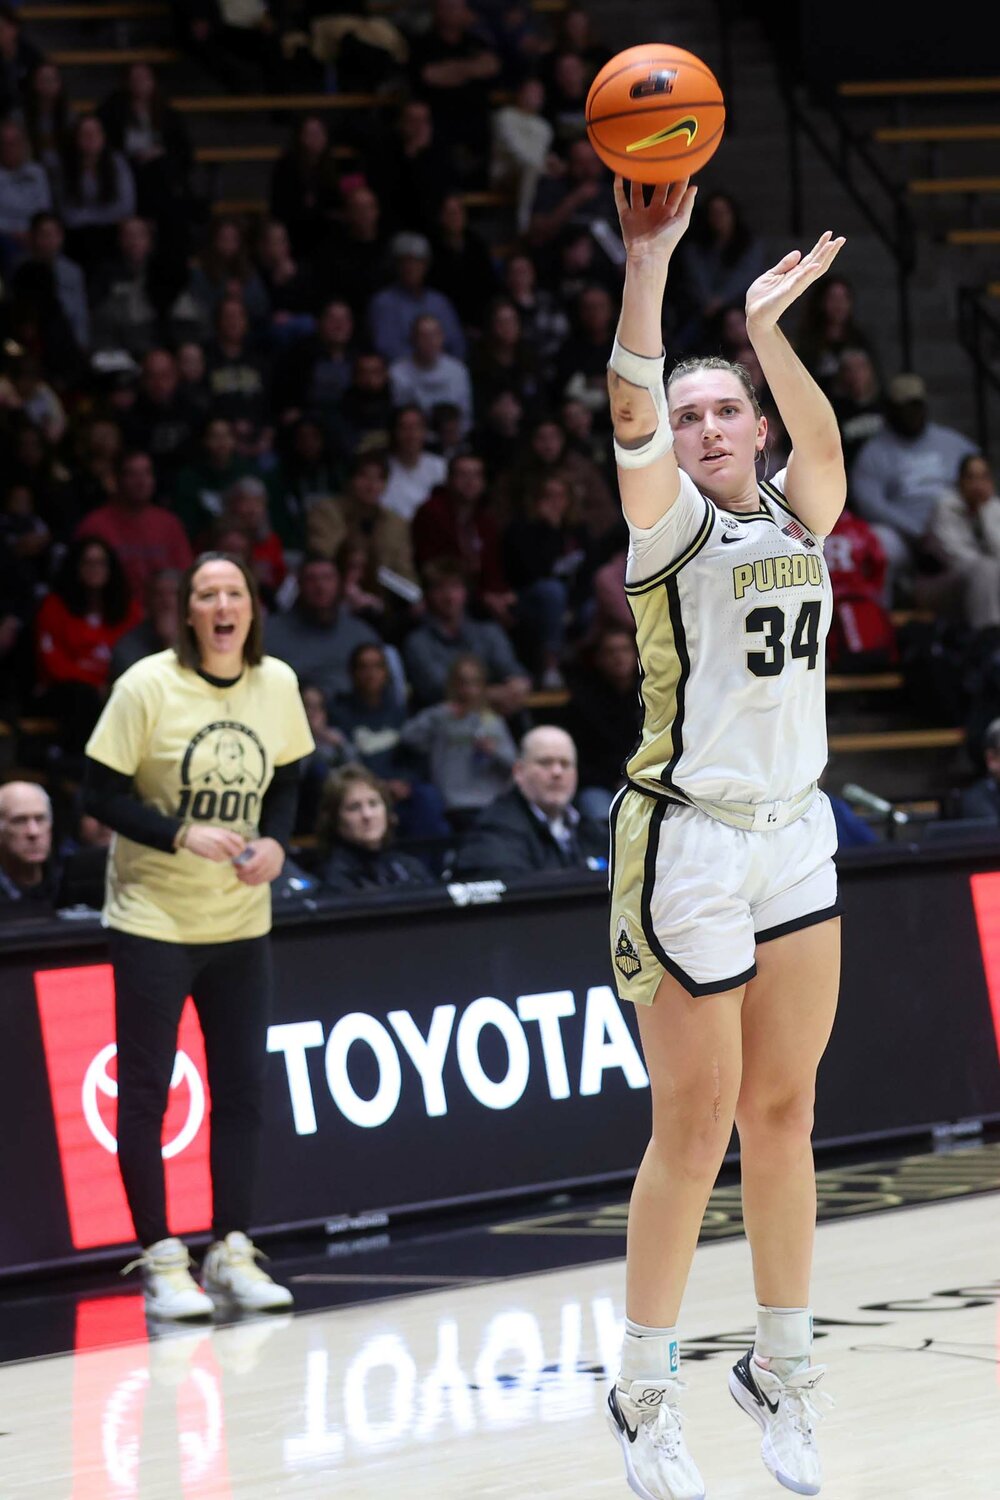 Caitlyn Harper of Purdue - hitting a three-pointer as coach Katie Gearlds reacts in the background